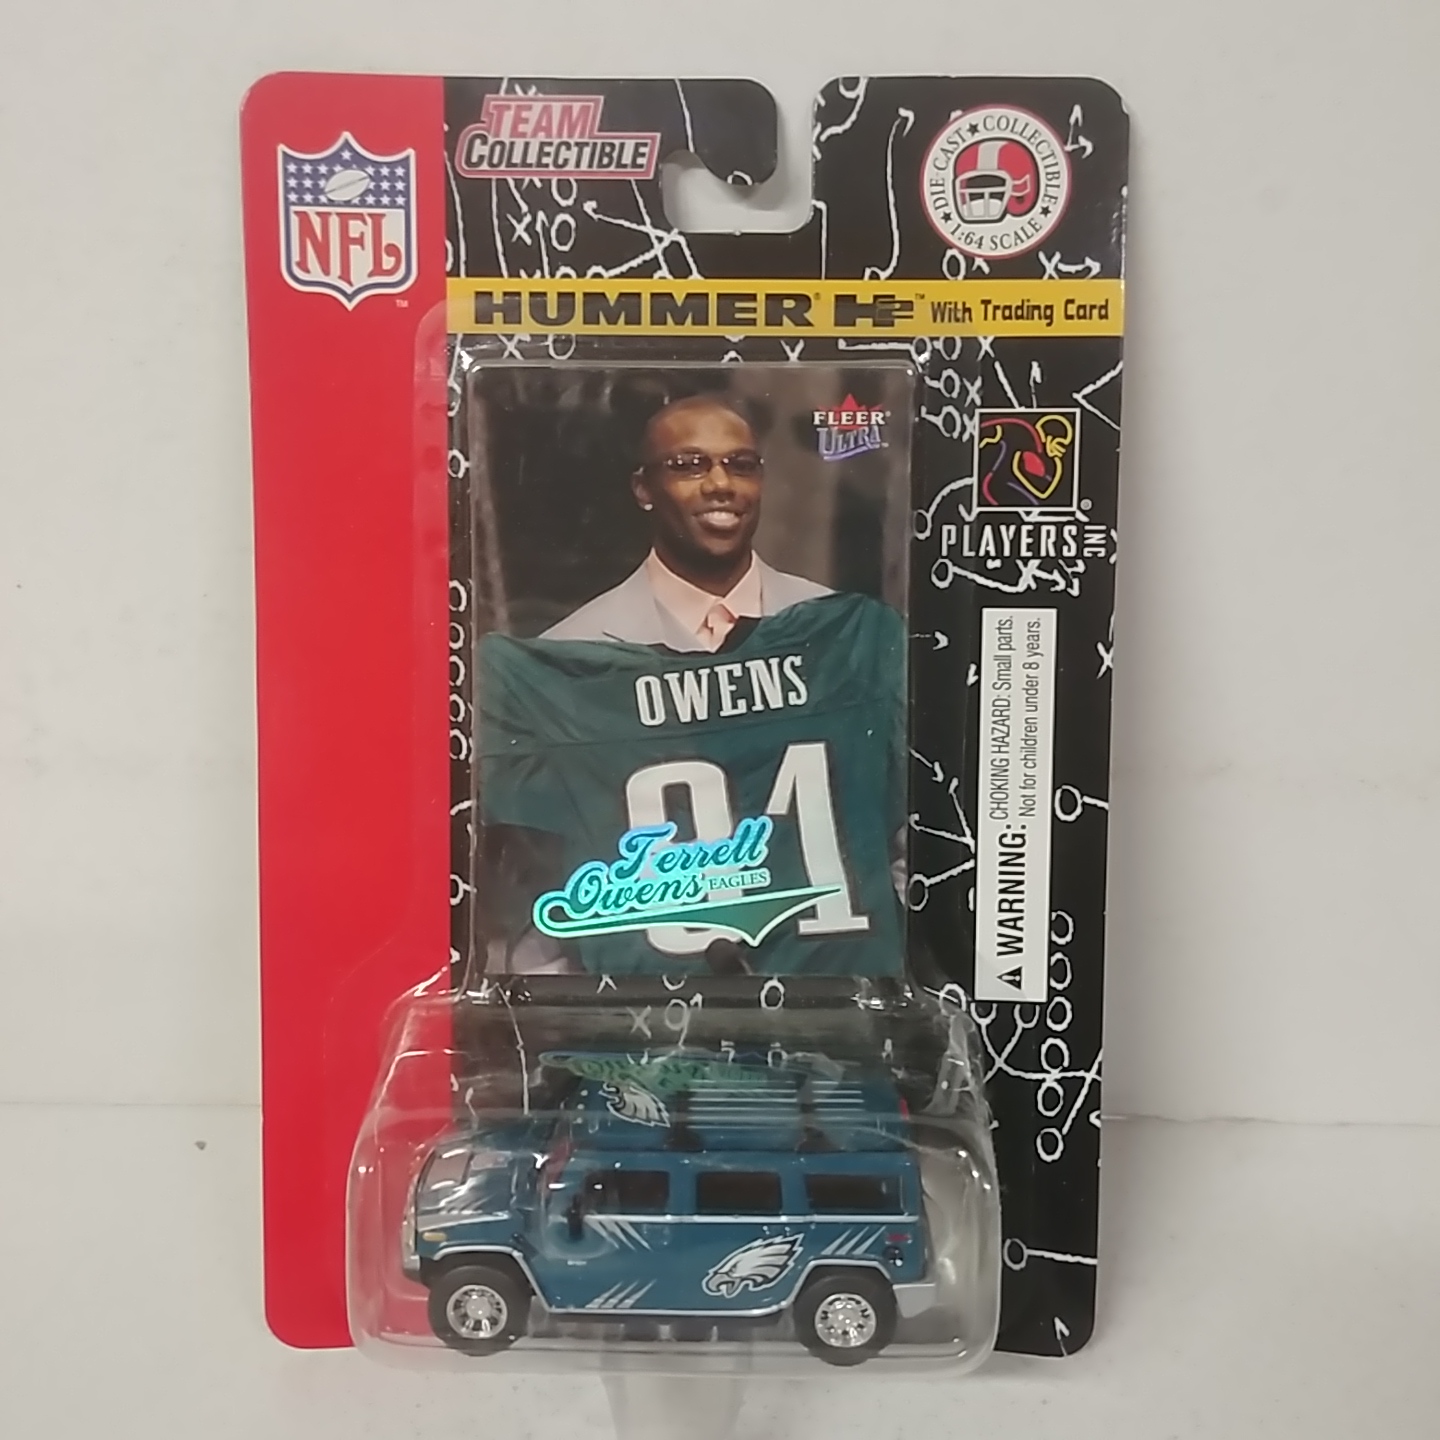 2004 Philadelphia Eagles 1/64th Hummer with Terrell Owens Trading Card